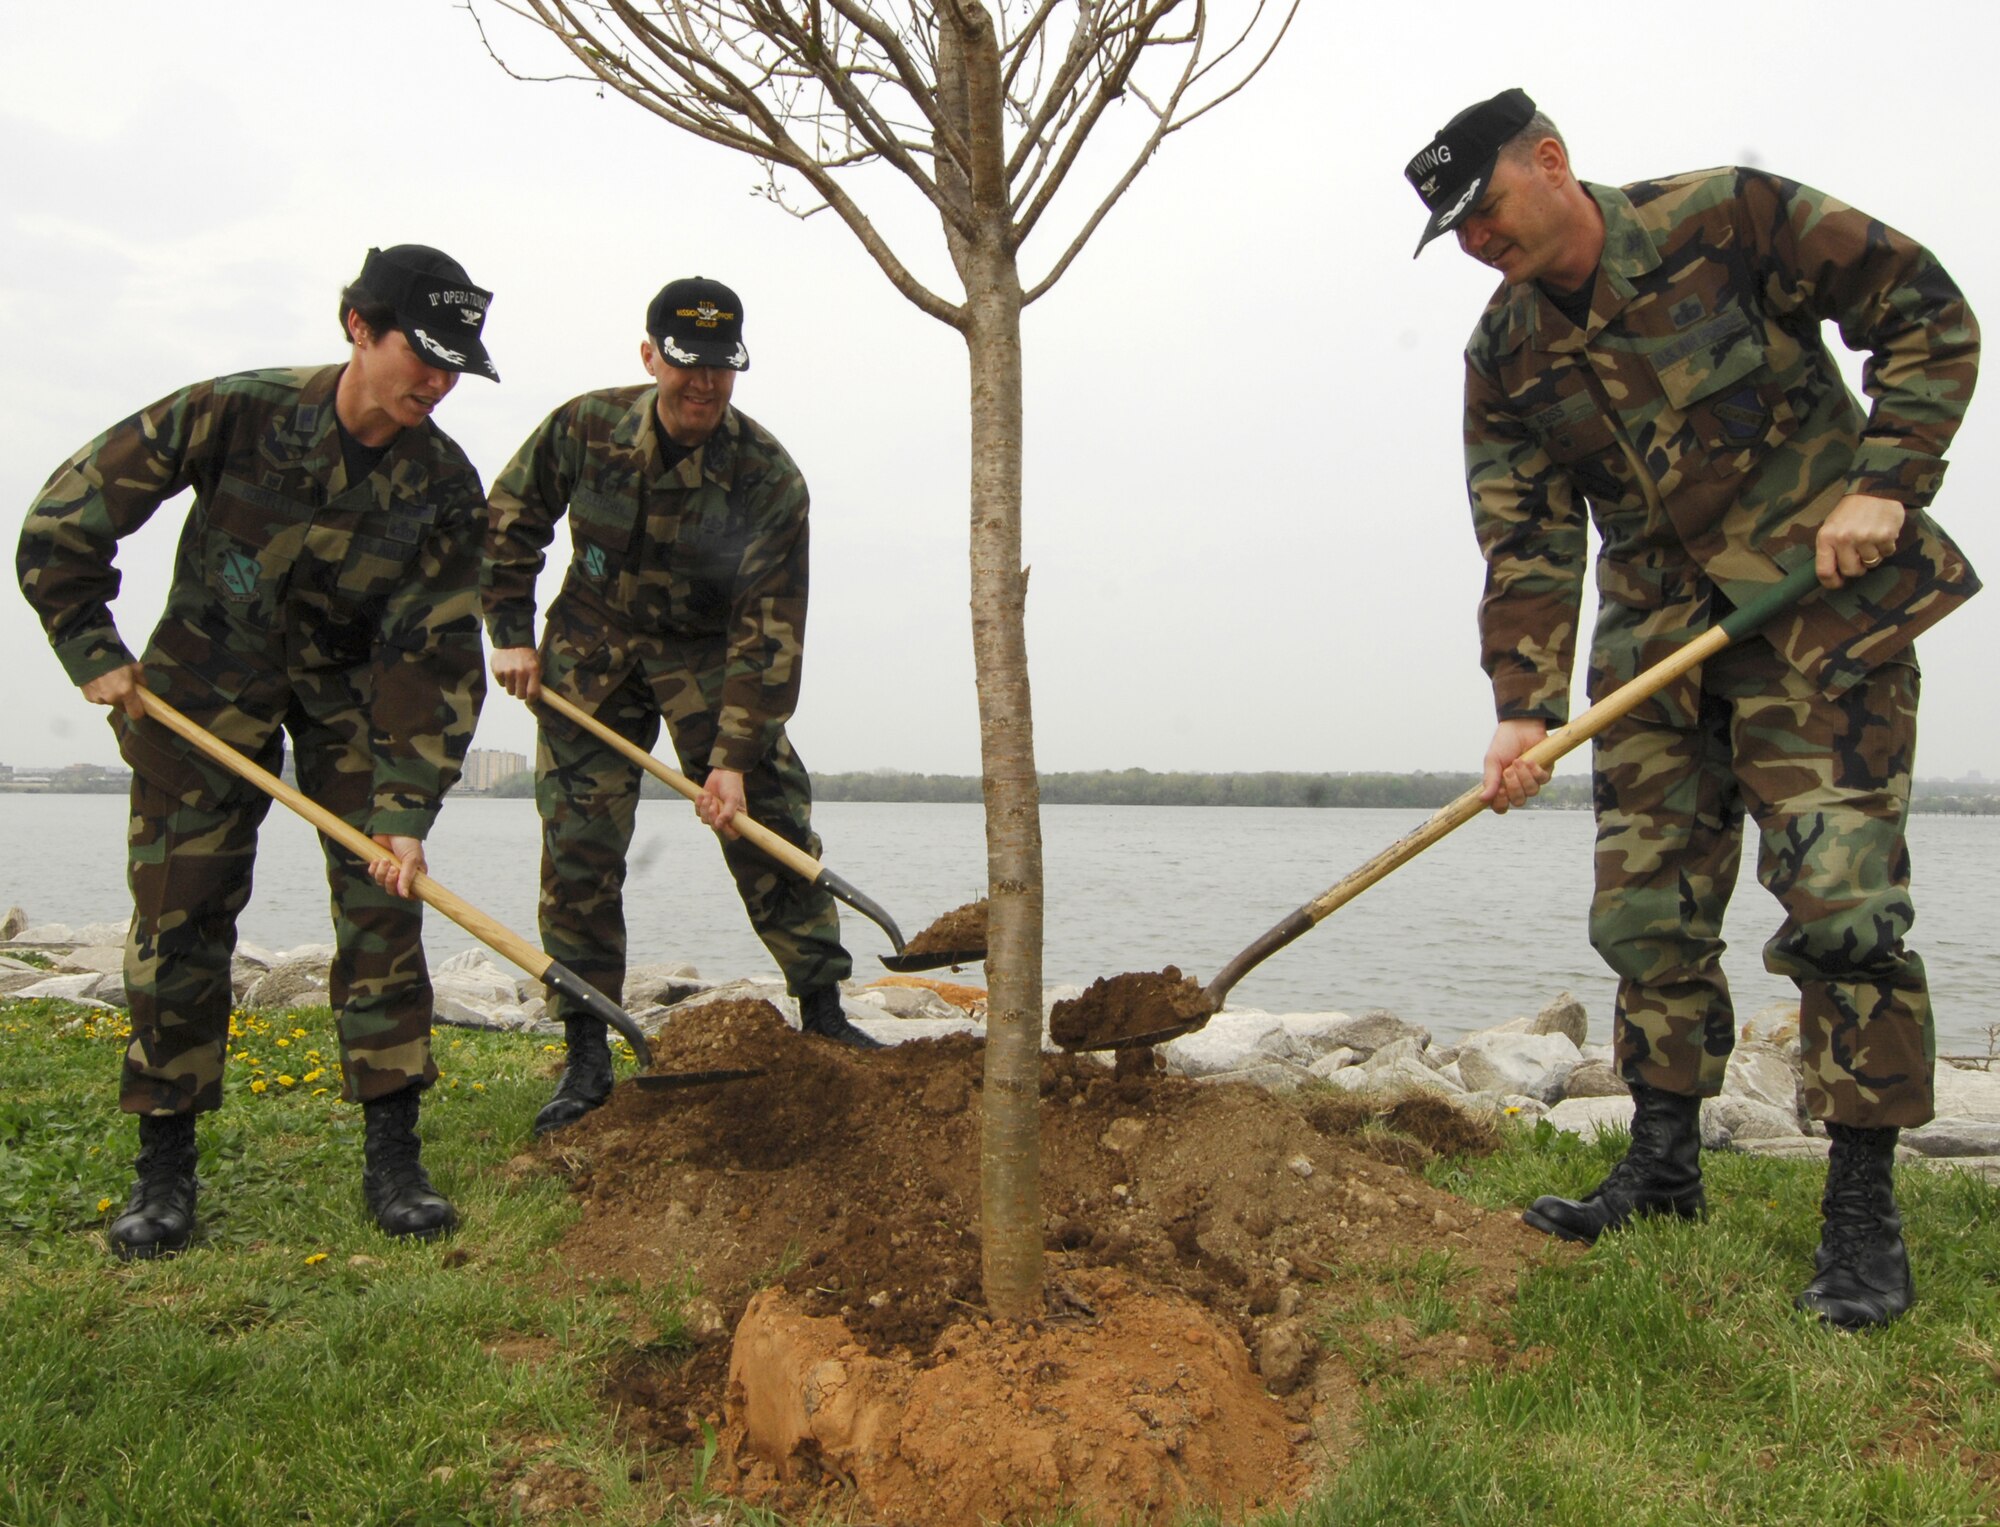 Col. Elizabeth B. Borelli (left), 11th Operations Group commander; Col. John M. Pletcher, 11th Mission Support Group commander; and Col Terry L. Ross (right), 11th Wing vice-commander, plant a cherry tree during the 11th Wing Earth Day celebration at the Bolling Marina April 24. The wing hosted the event in recognition of Earth Day which is observed annually on April 22 across the world.  (U.S. Air Force photo by Airman 1st Class Alexandre Montes)